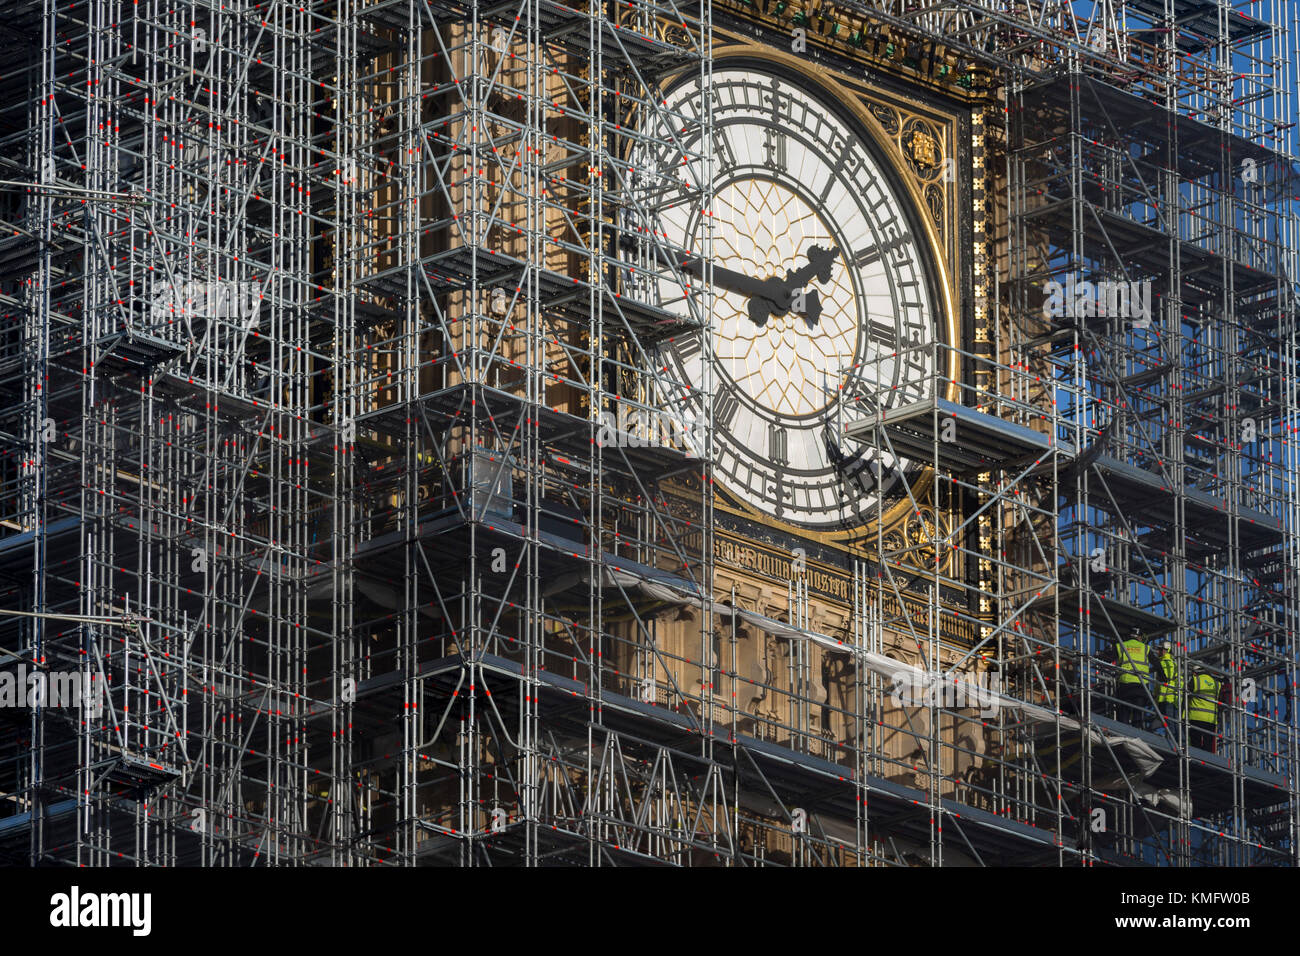 The Elizabeth Tower that holds the now silent Big Ben bell, along with the the Houses of Parliament, are covered in scaffolding,  on 1st December 2017, in Westminster, London, England. The bell will remain silent during this renovation by contractor Sir Robert McAlpine until 2021 and the estimated cost of repairing the tower and other parts of the 19th century Gothic building, has doubled to £61m, authorities have said. Stock Photo